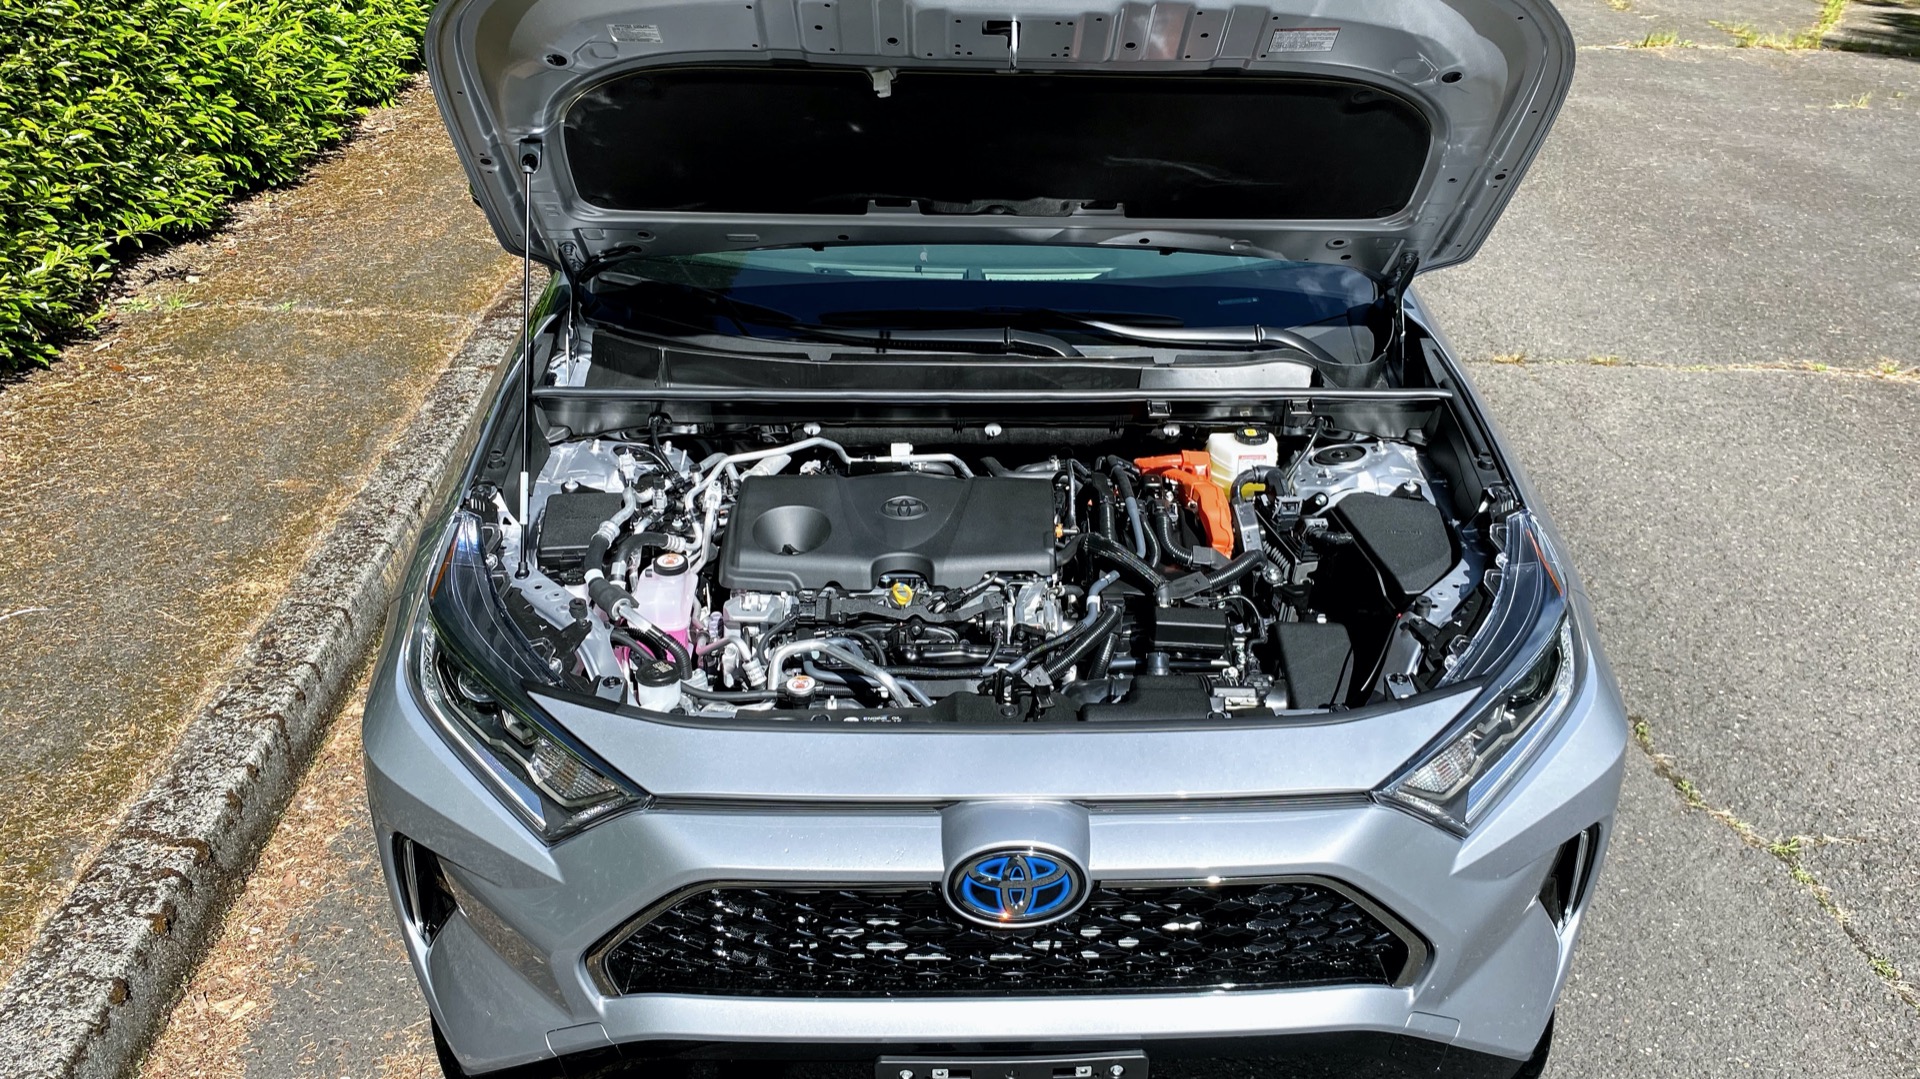 2021 Toyota RAV4 Prime first drive review The way a plugin hybrid